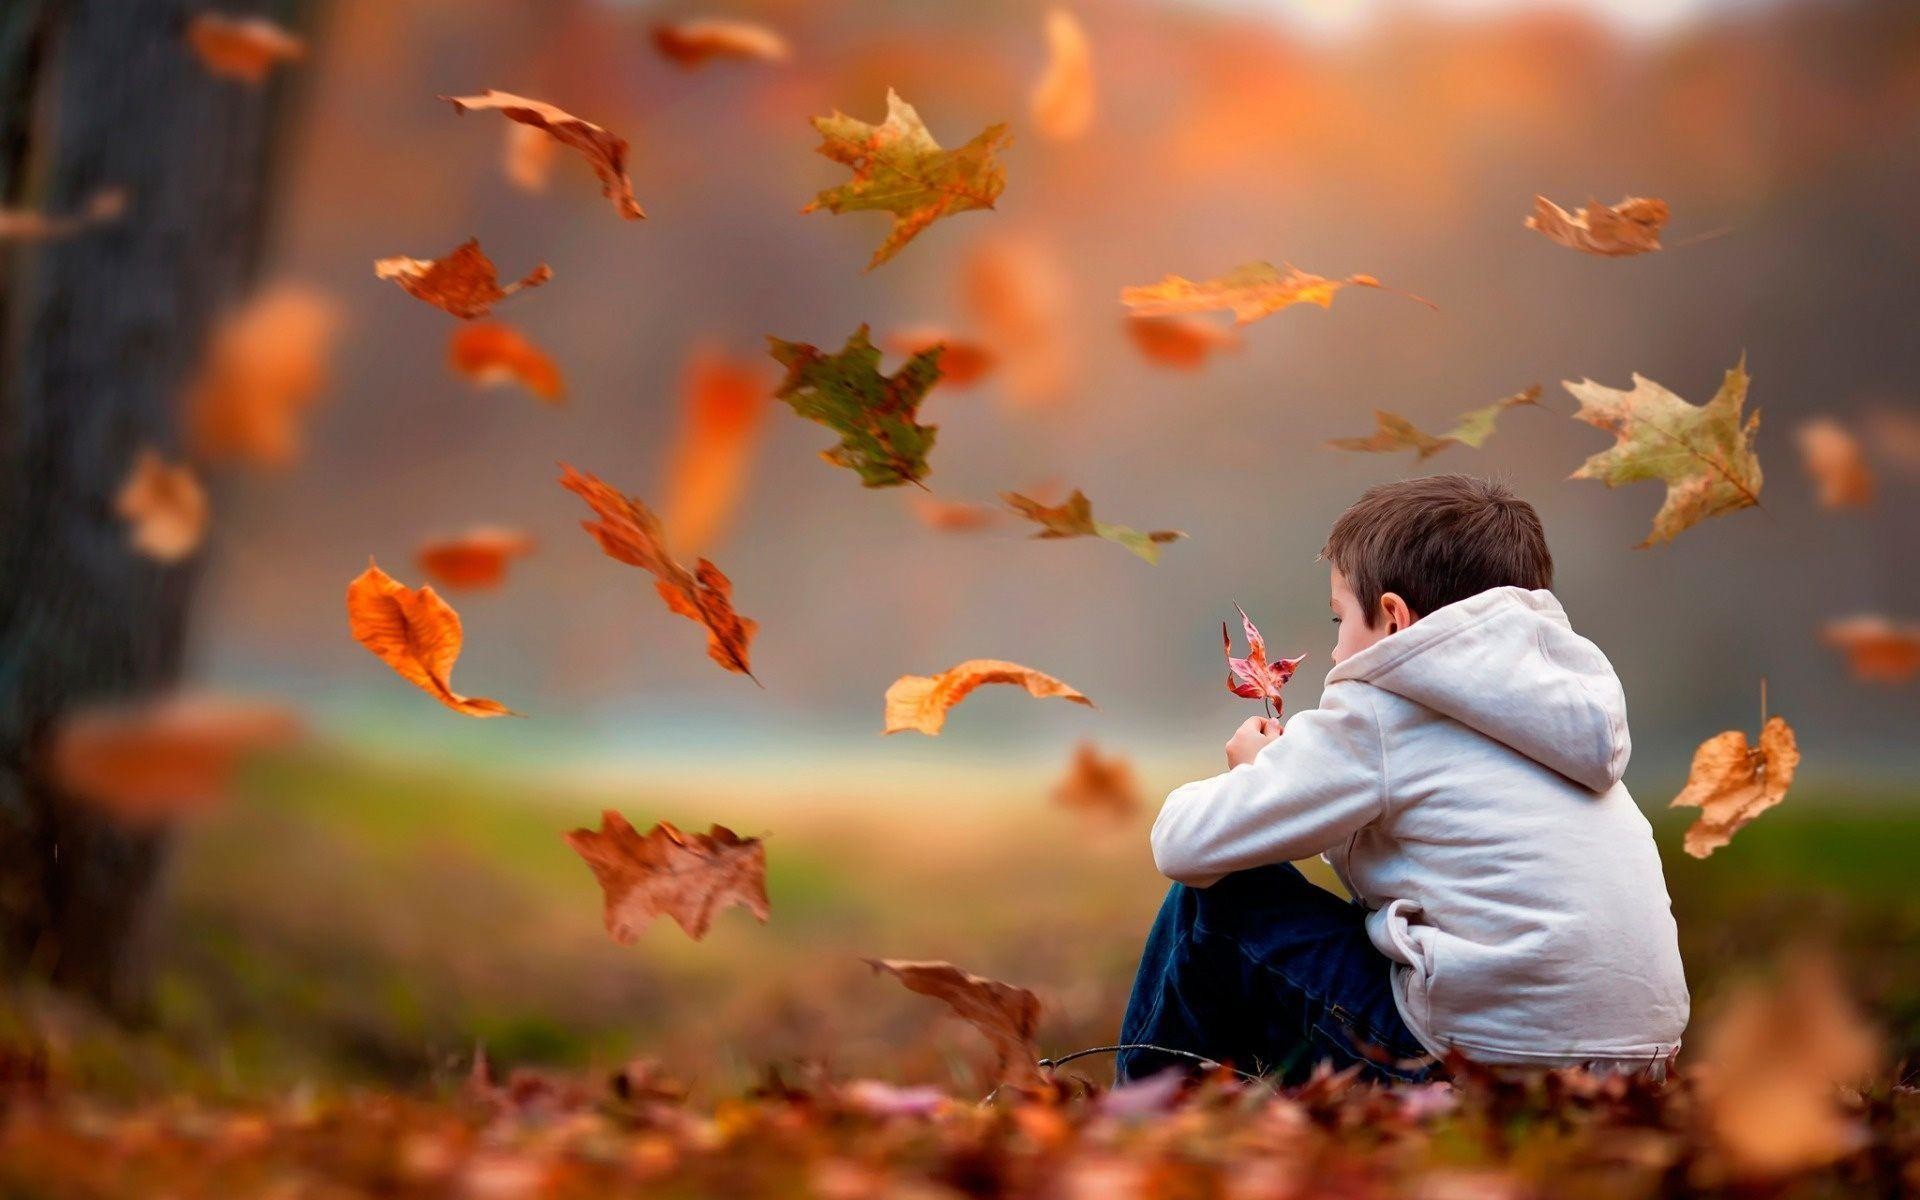 sad wallpapers for whatsapp,people in nature,leaf,sky,autumn,happy